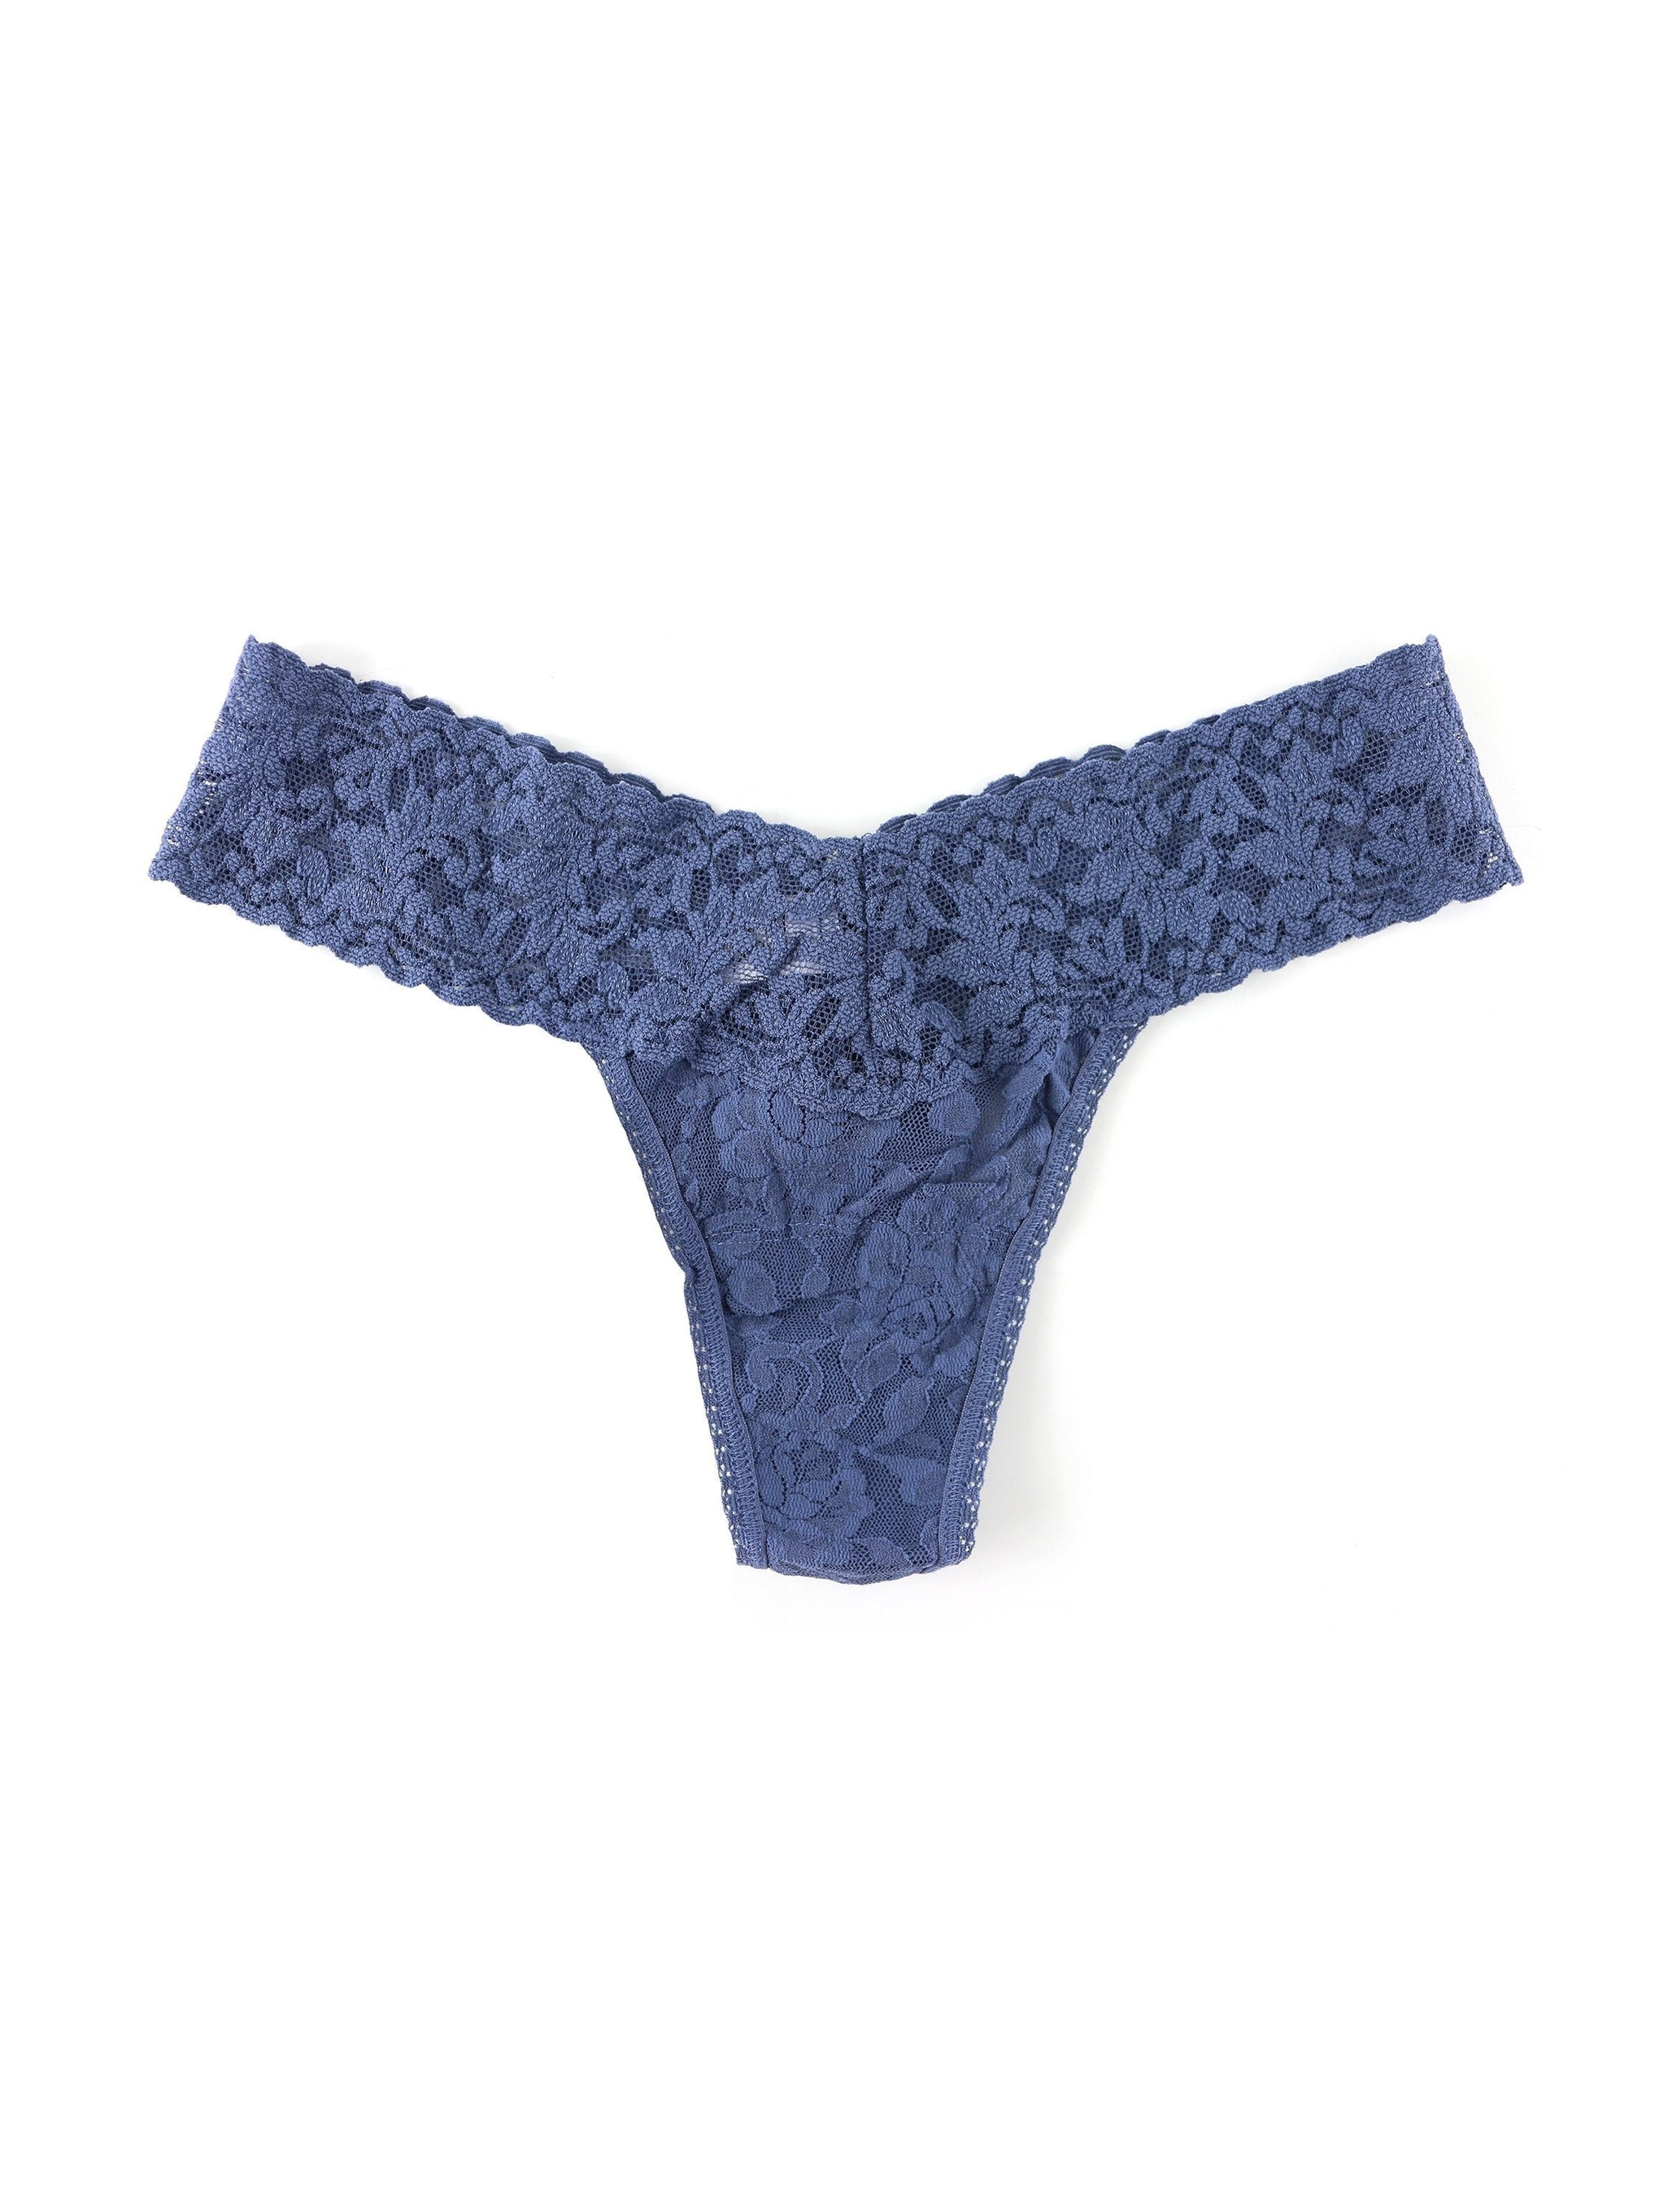 Petite Size Signature Lace Low Rise Thong-NIGHTSHADOW BLUE-Hanky Panky